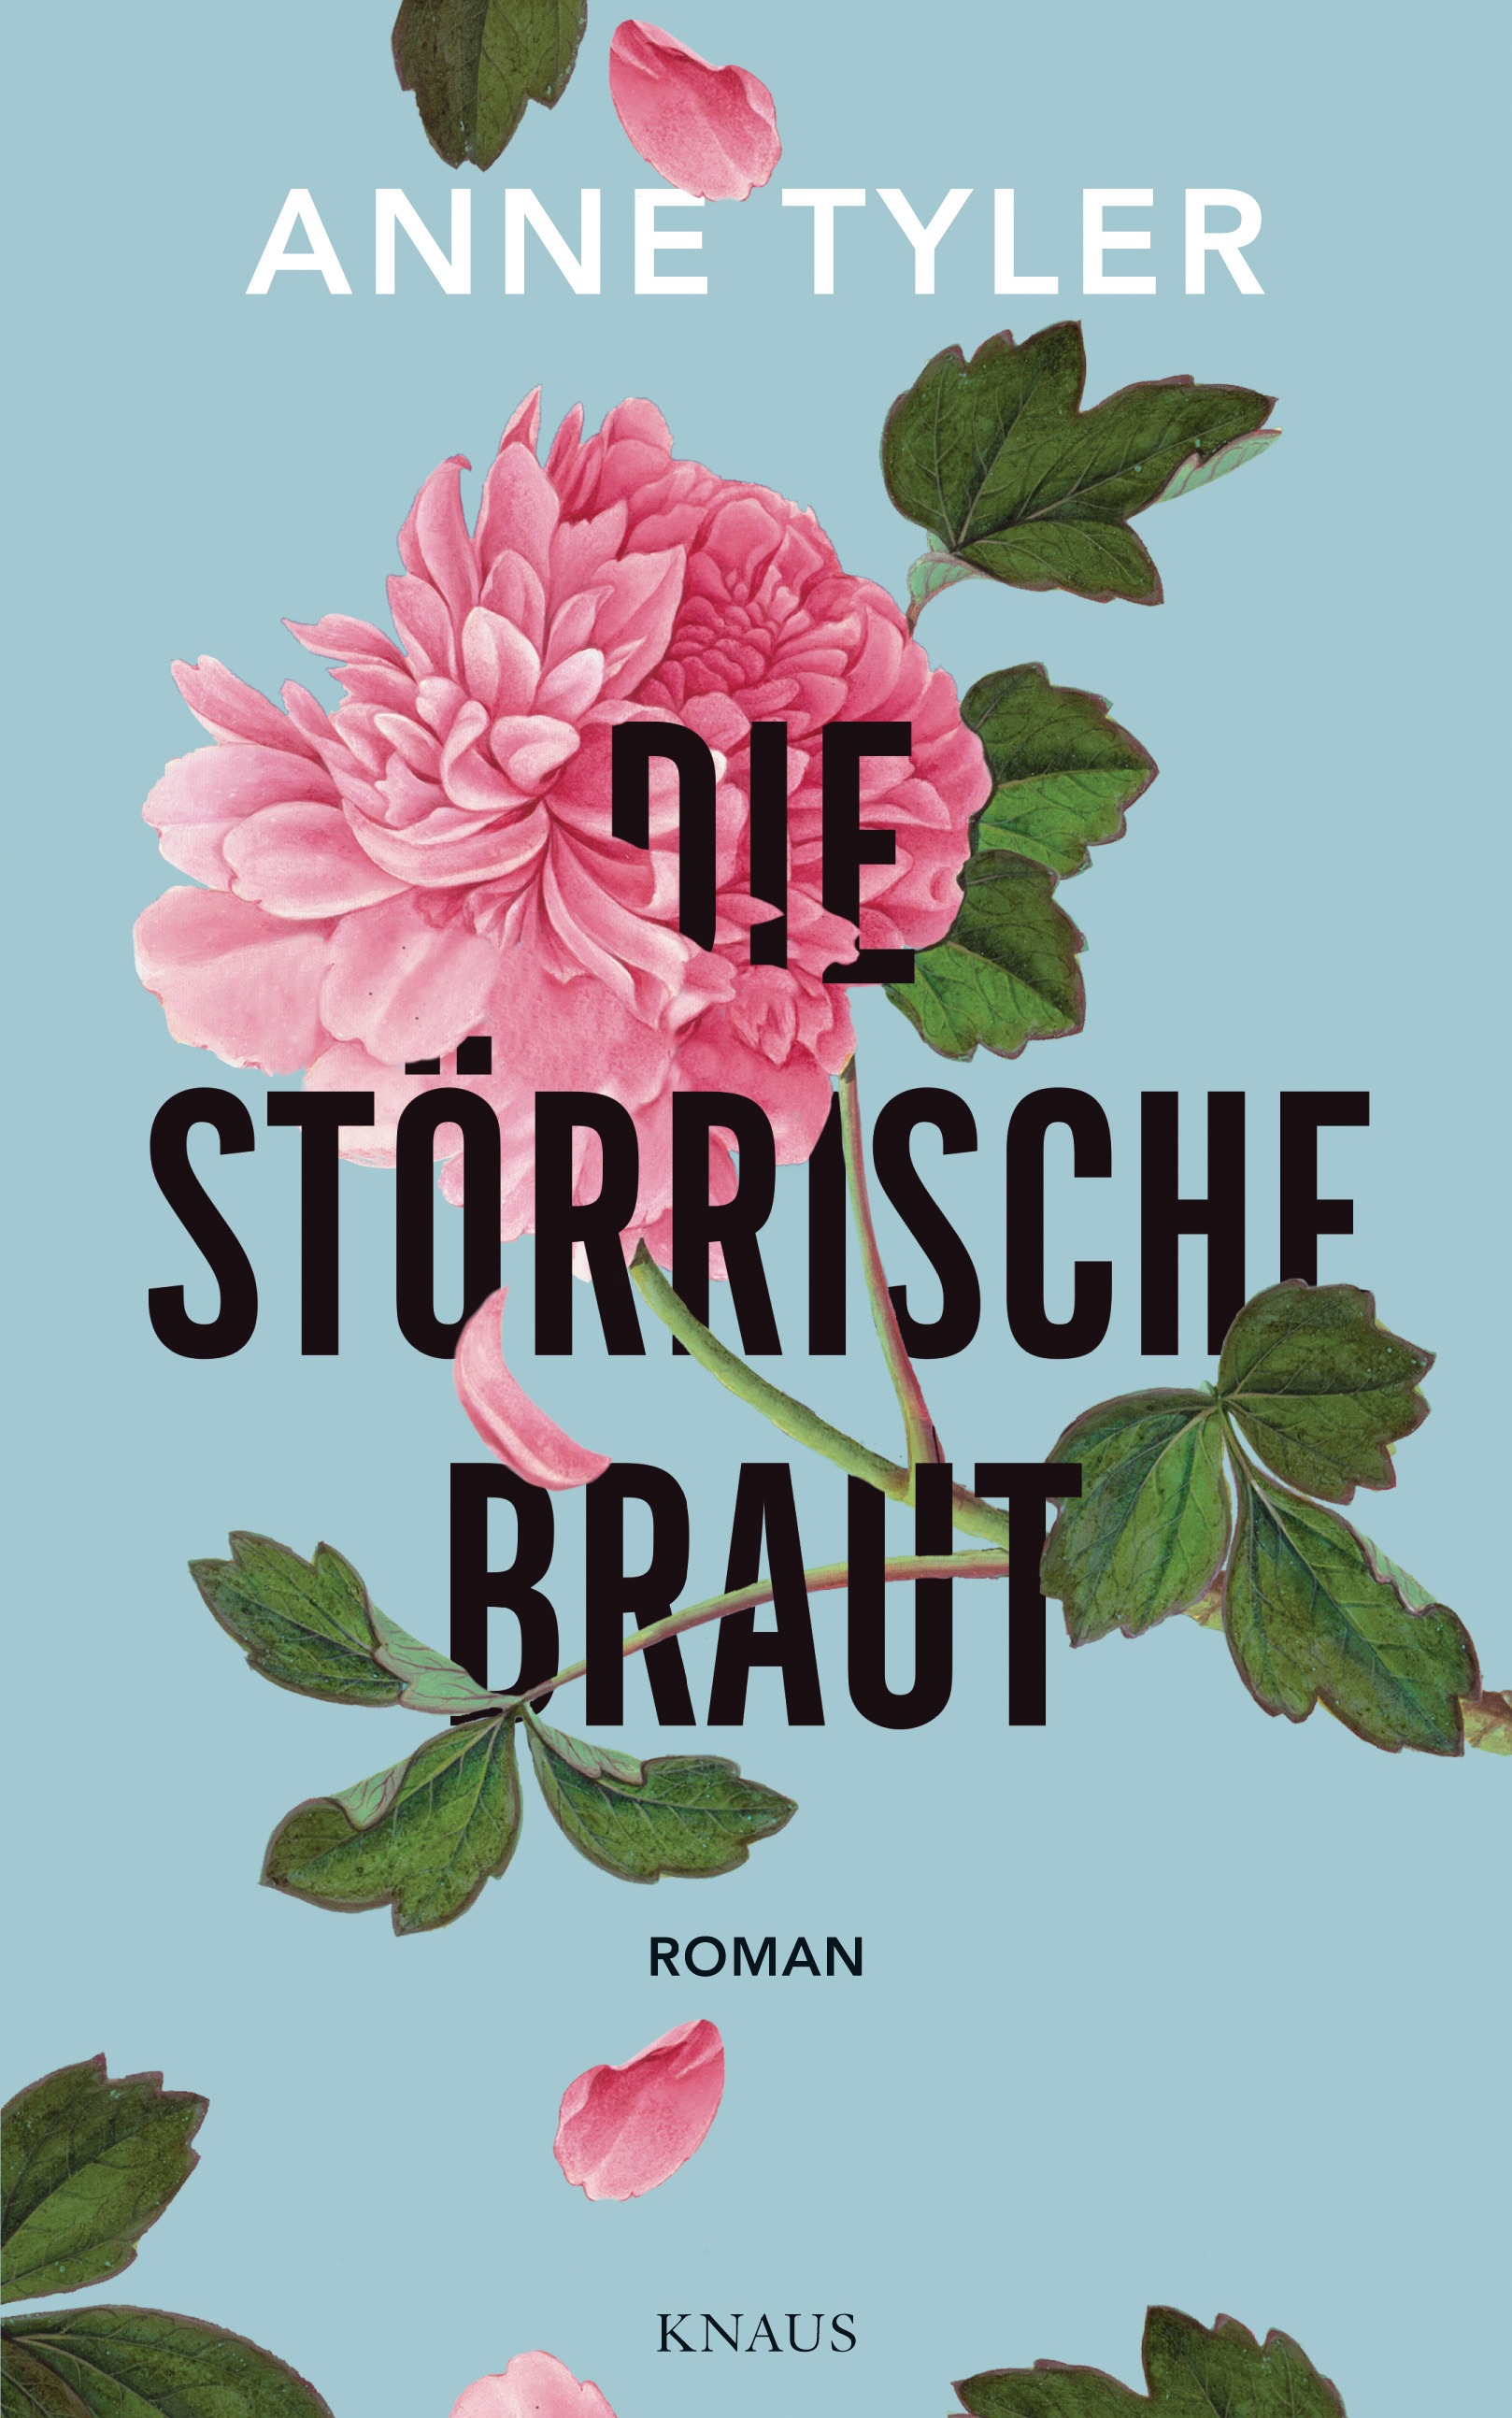 image of the book cover of Die Storrische braut by Anne Tyler, published by Knaus featuring a Bridgeman Image on the cover